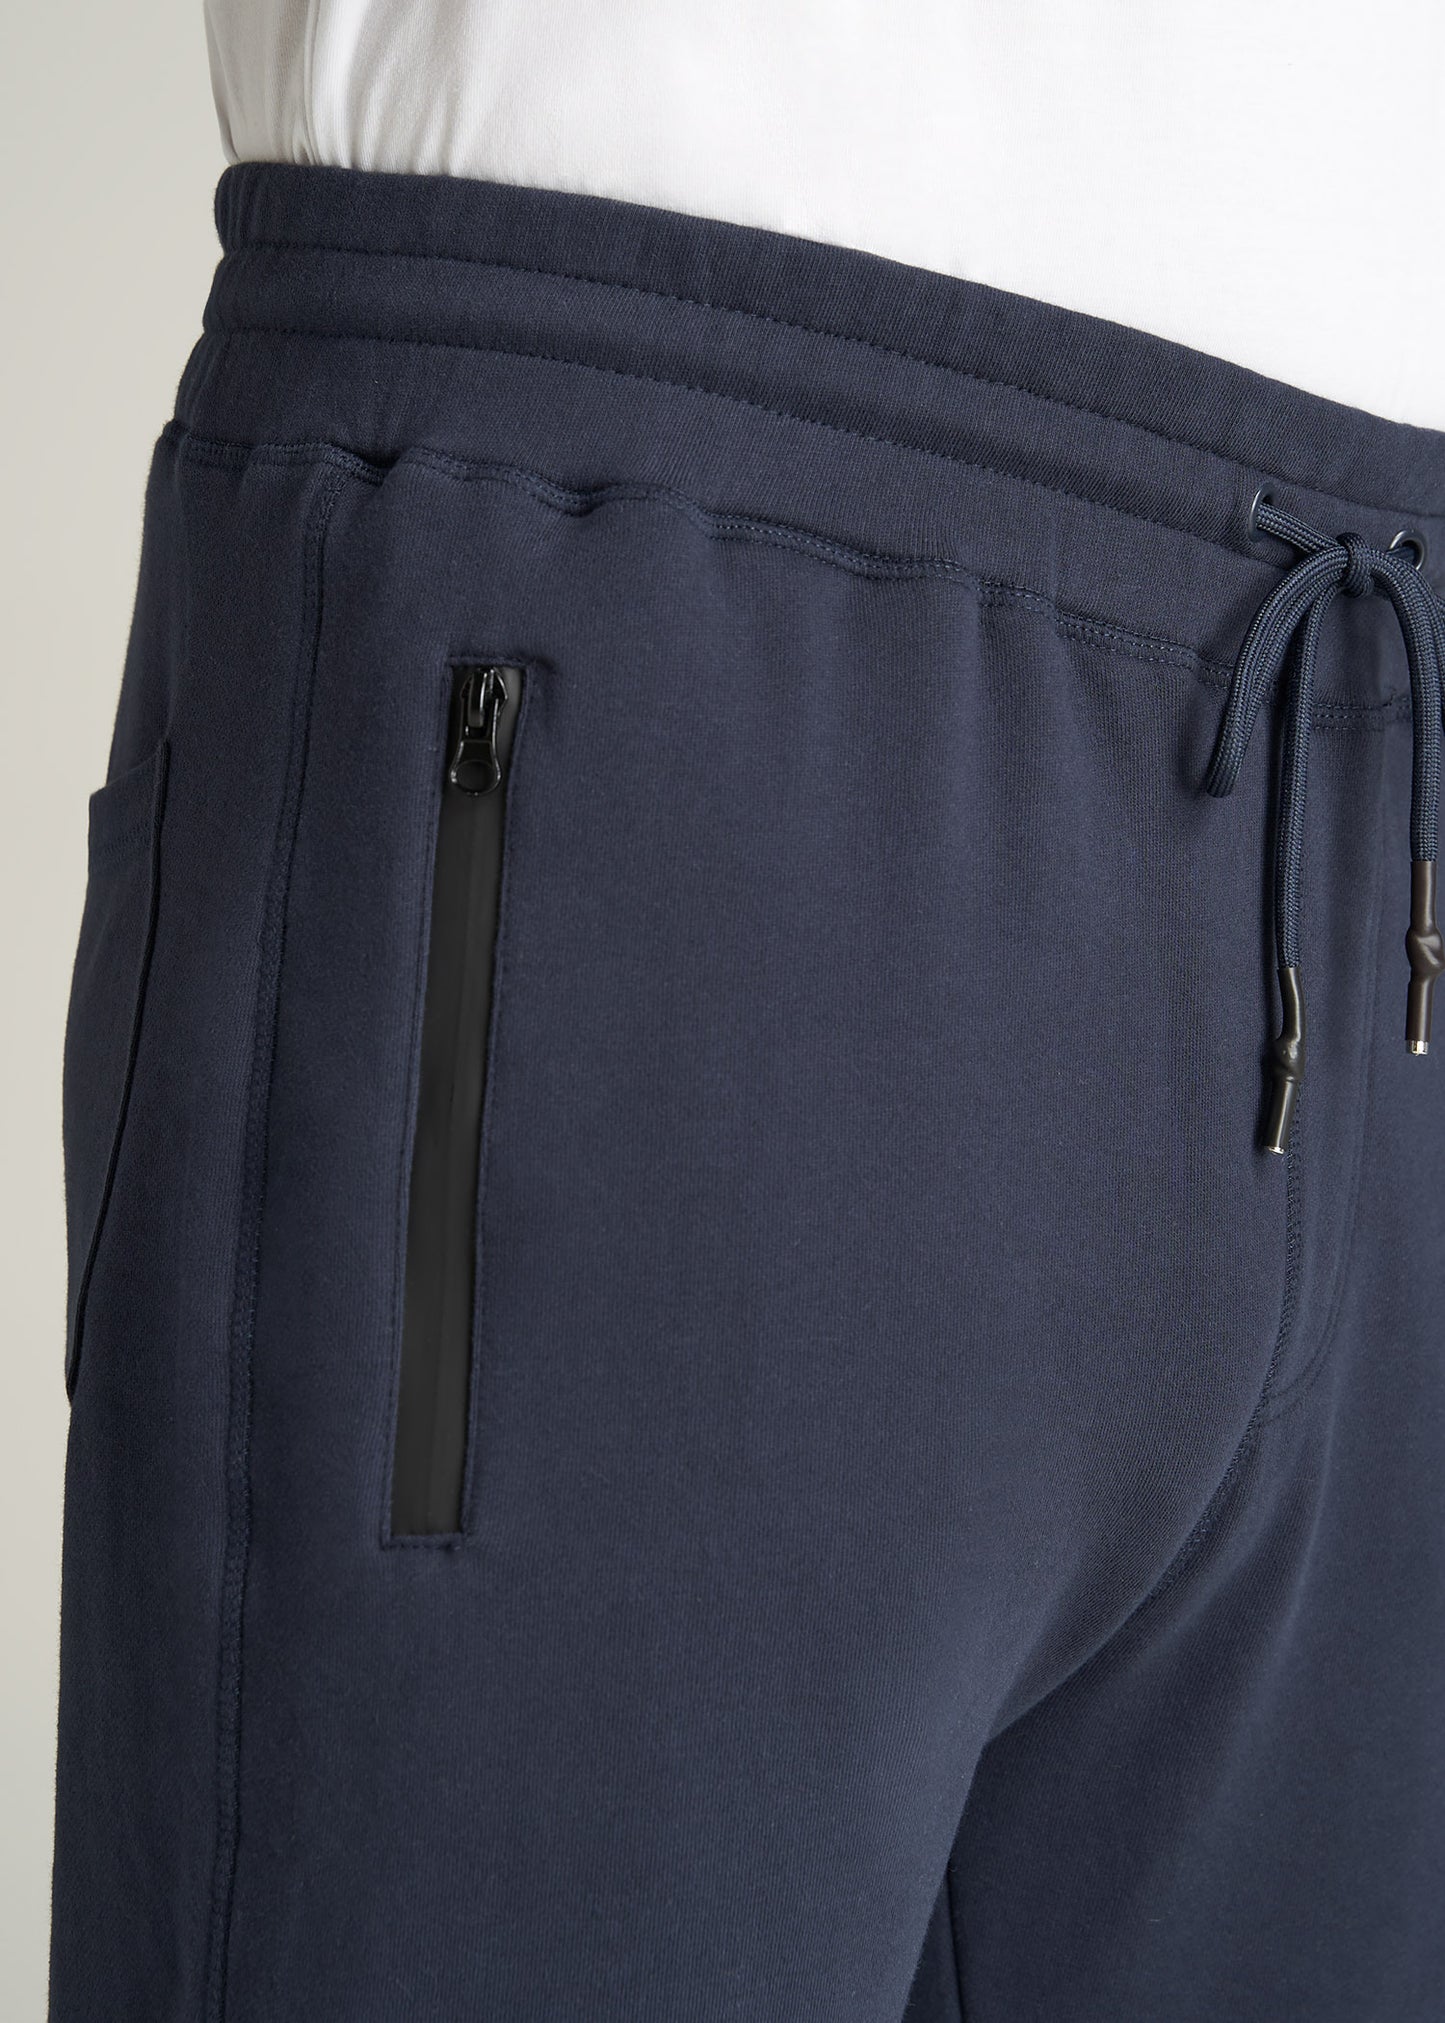 American-Tall-Men-80-20-FrenchTerry-Jogger-Navy-detail